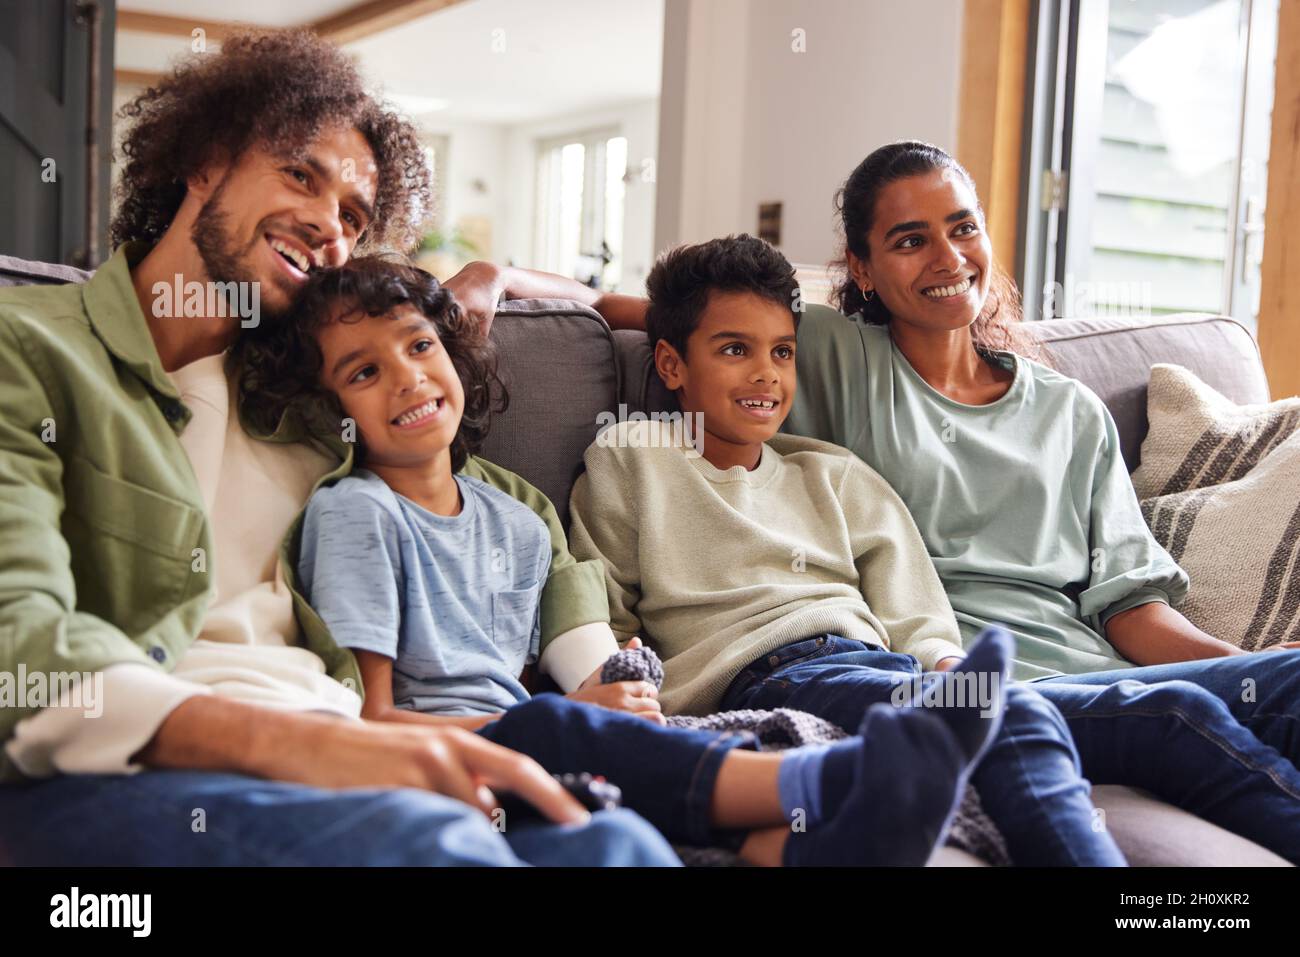 Family watching TV at home on sofa Stock Photo